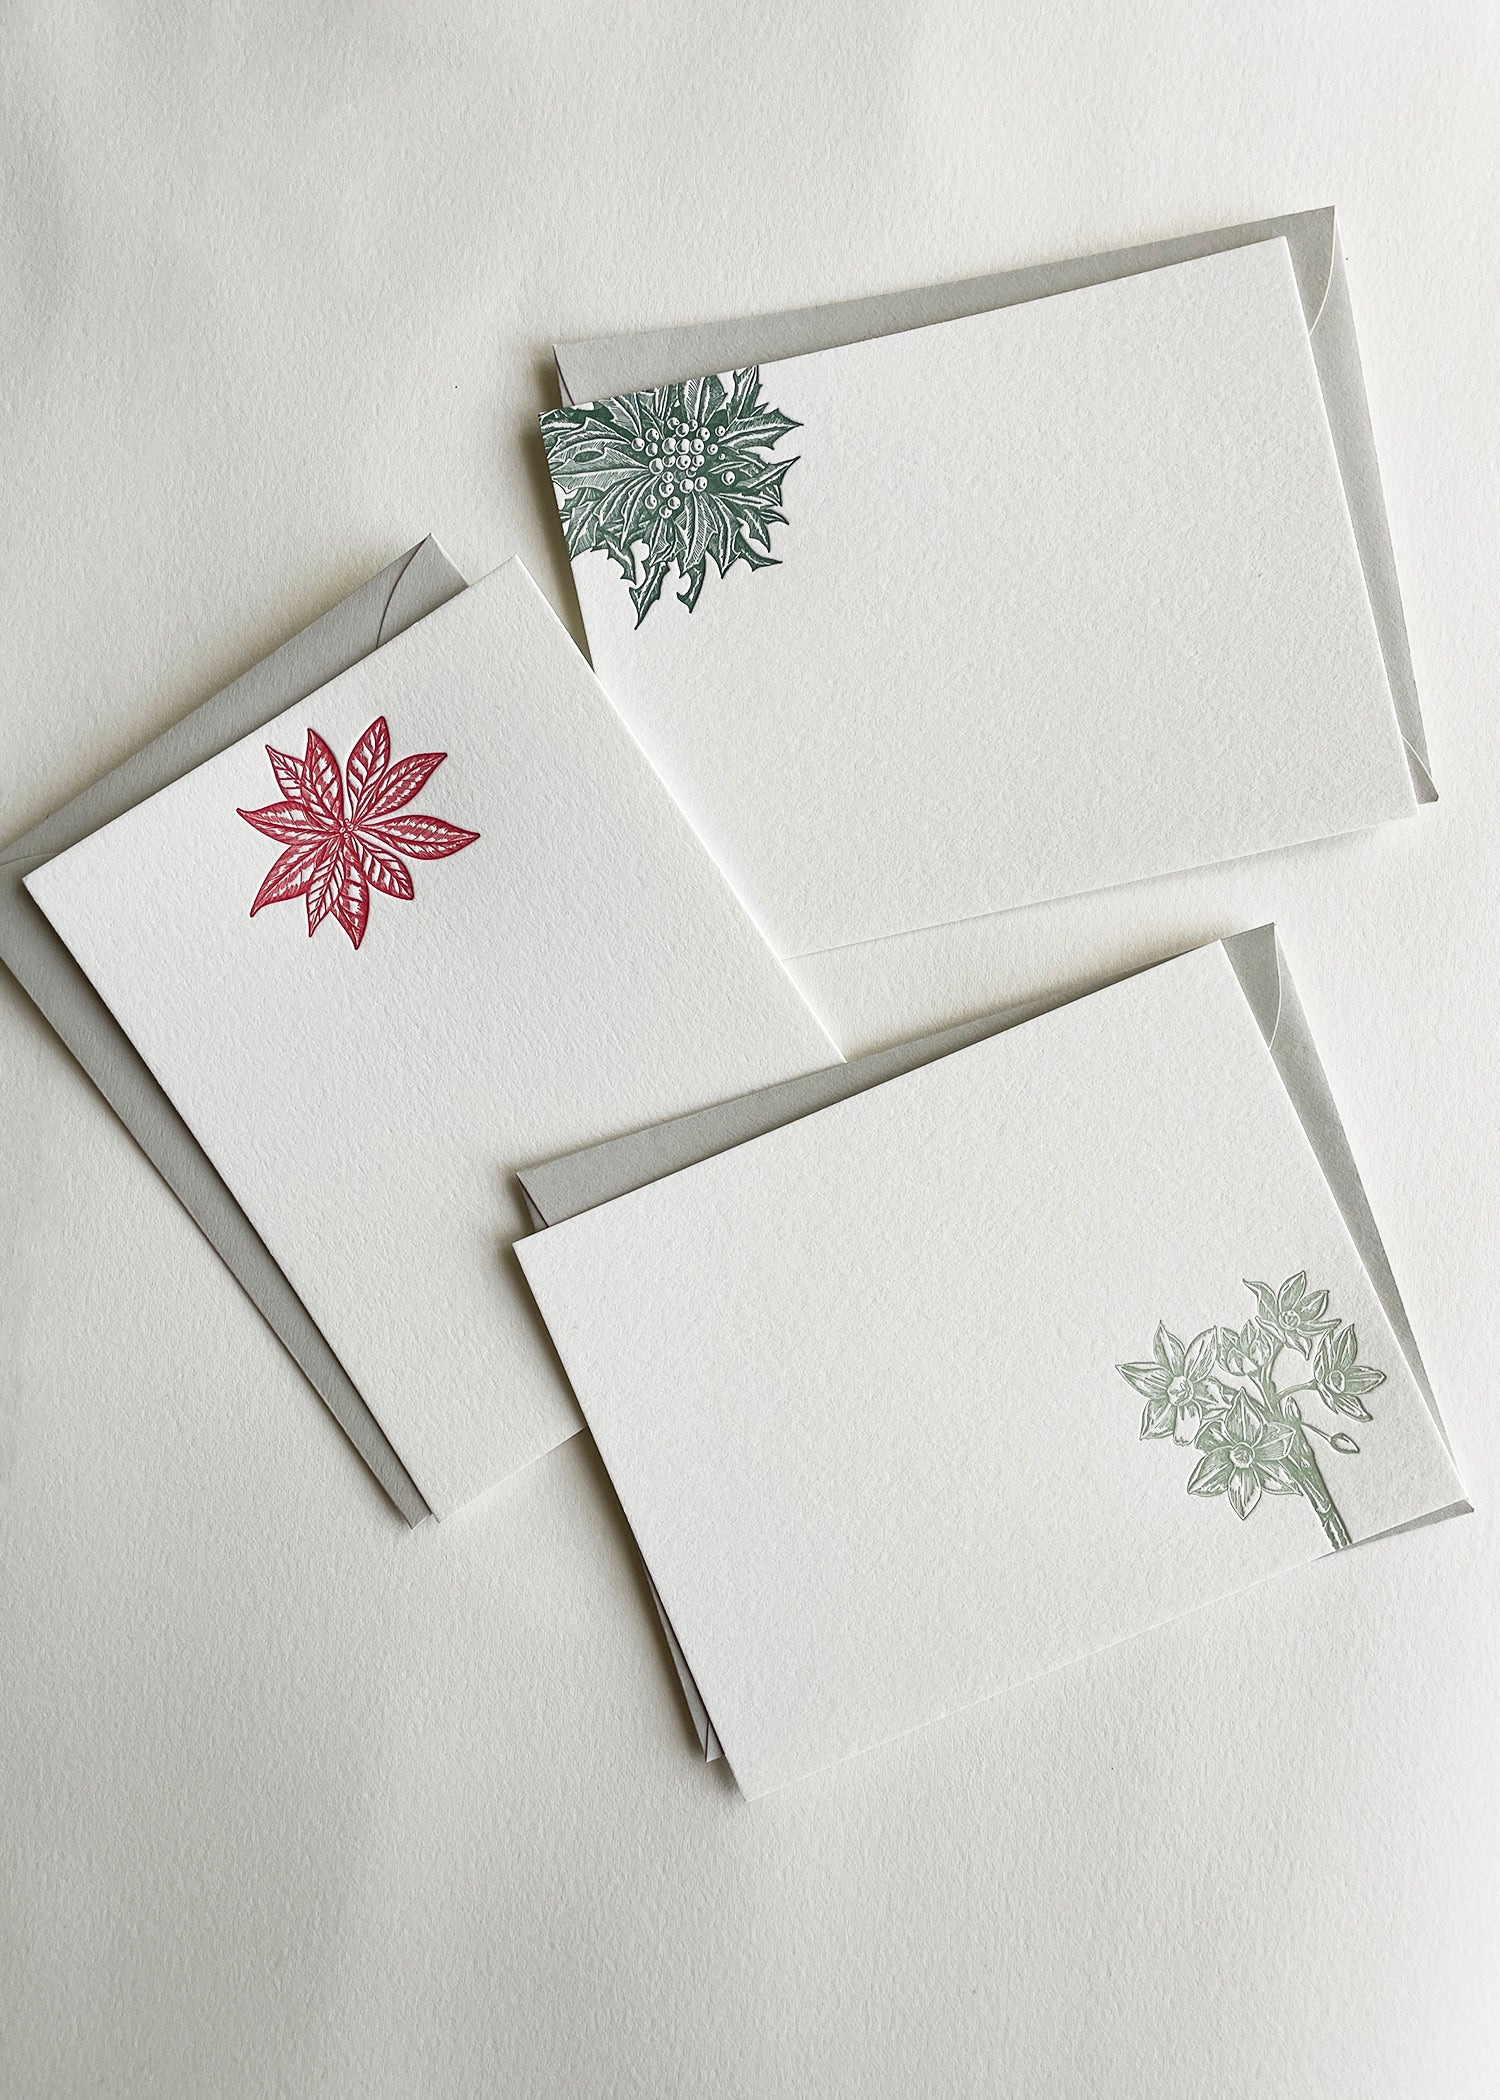 A variety of letterpress holiday flat note cards by Rust Belt Love